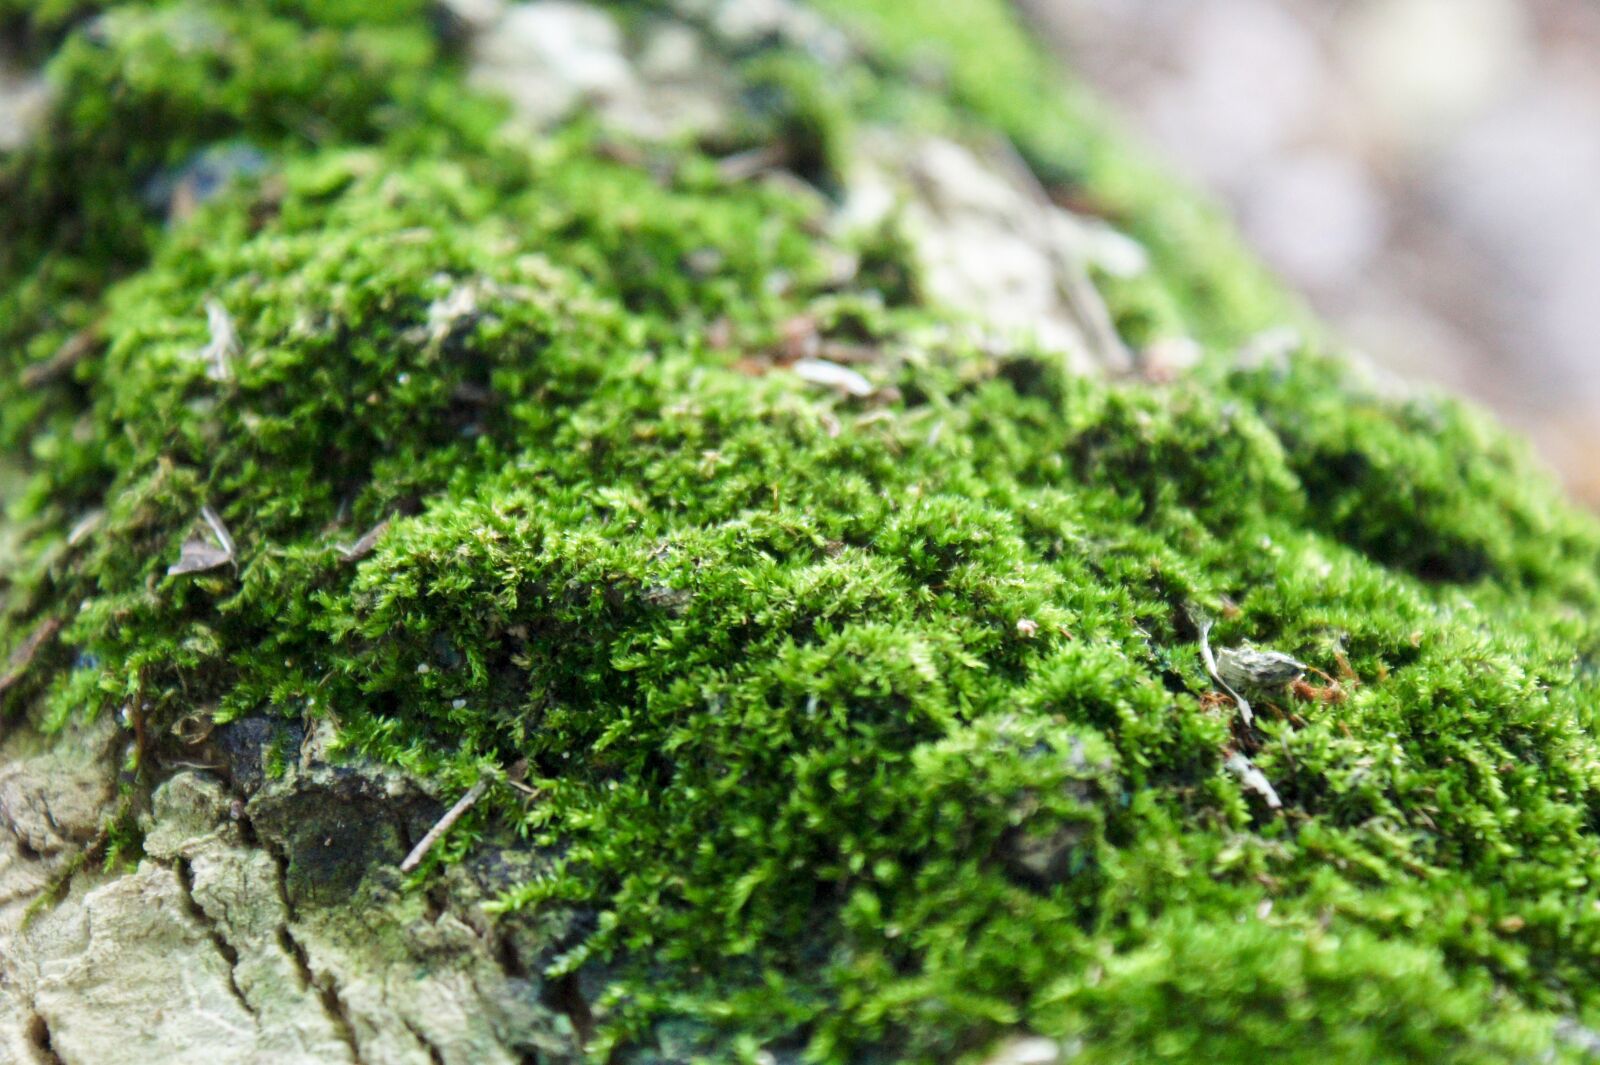 Sony SLT-A33 sample photo. Moss, forest, nature photography